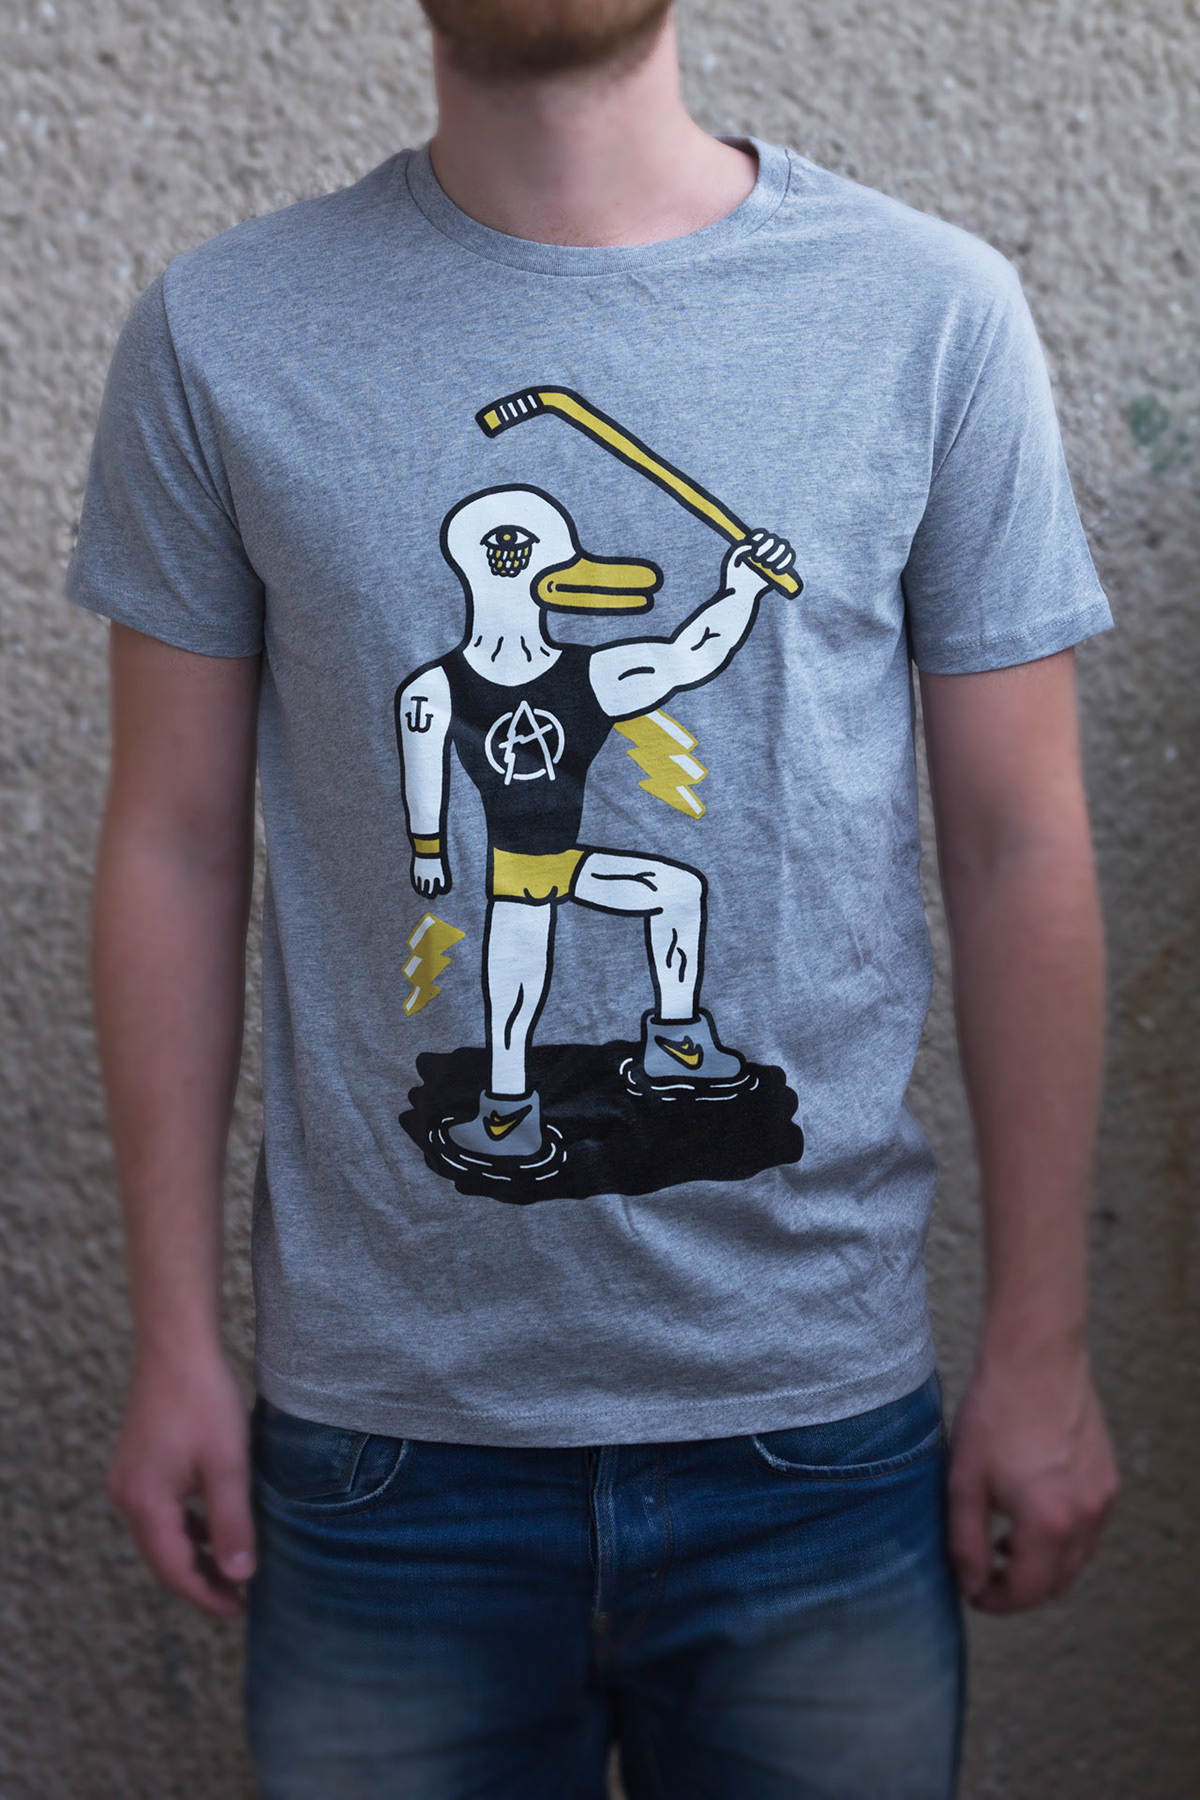 t-shirt duck Admiral ice hockey anarchist oil crazy cool Hipster